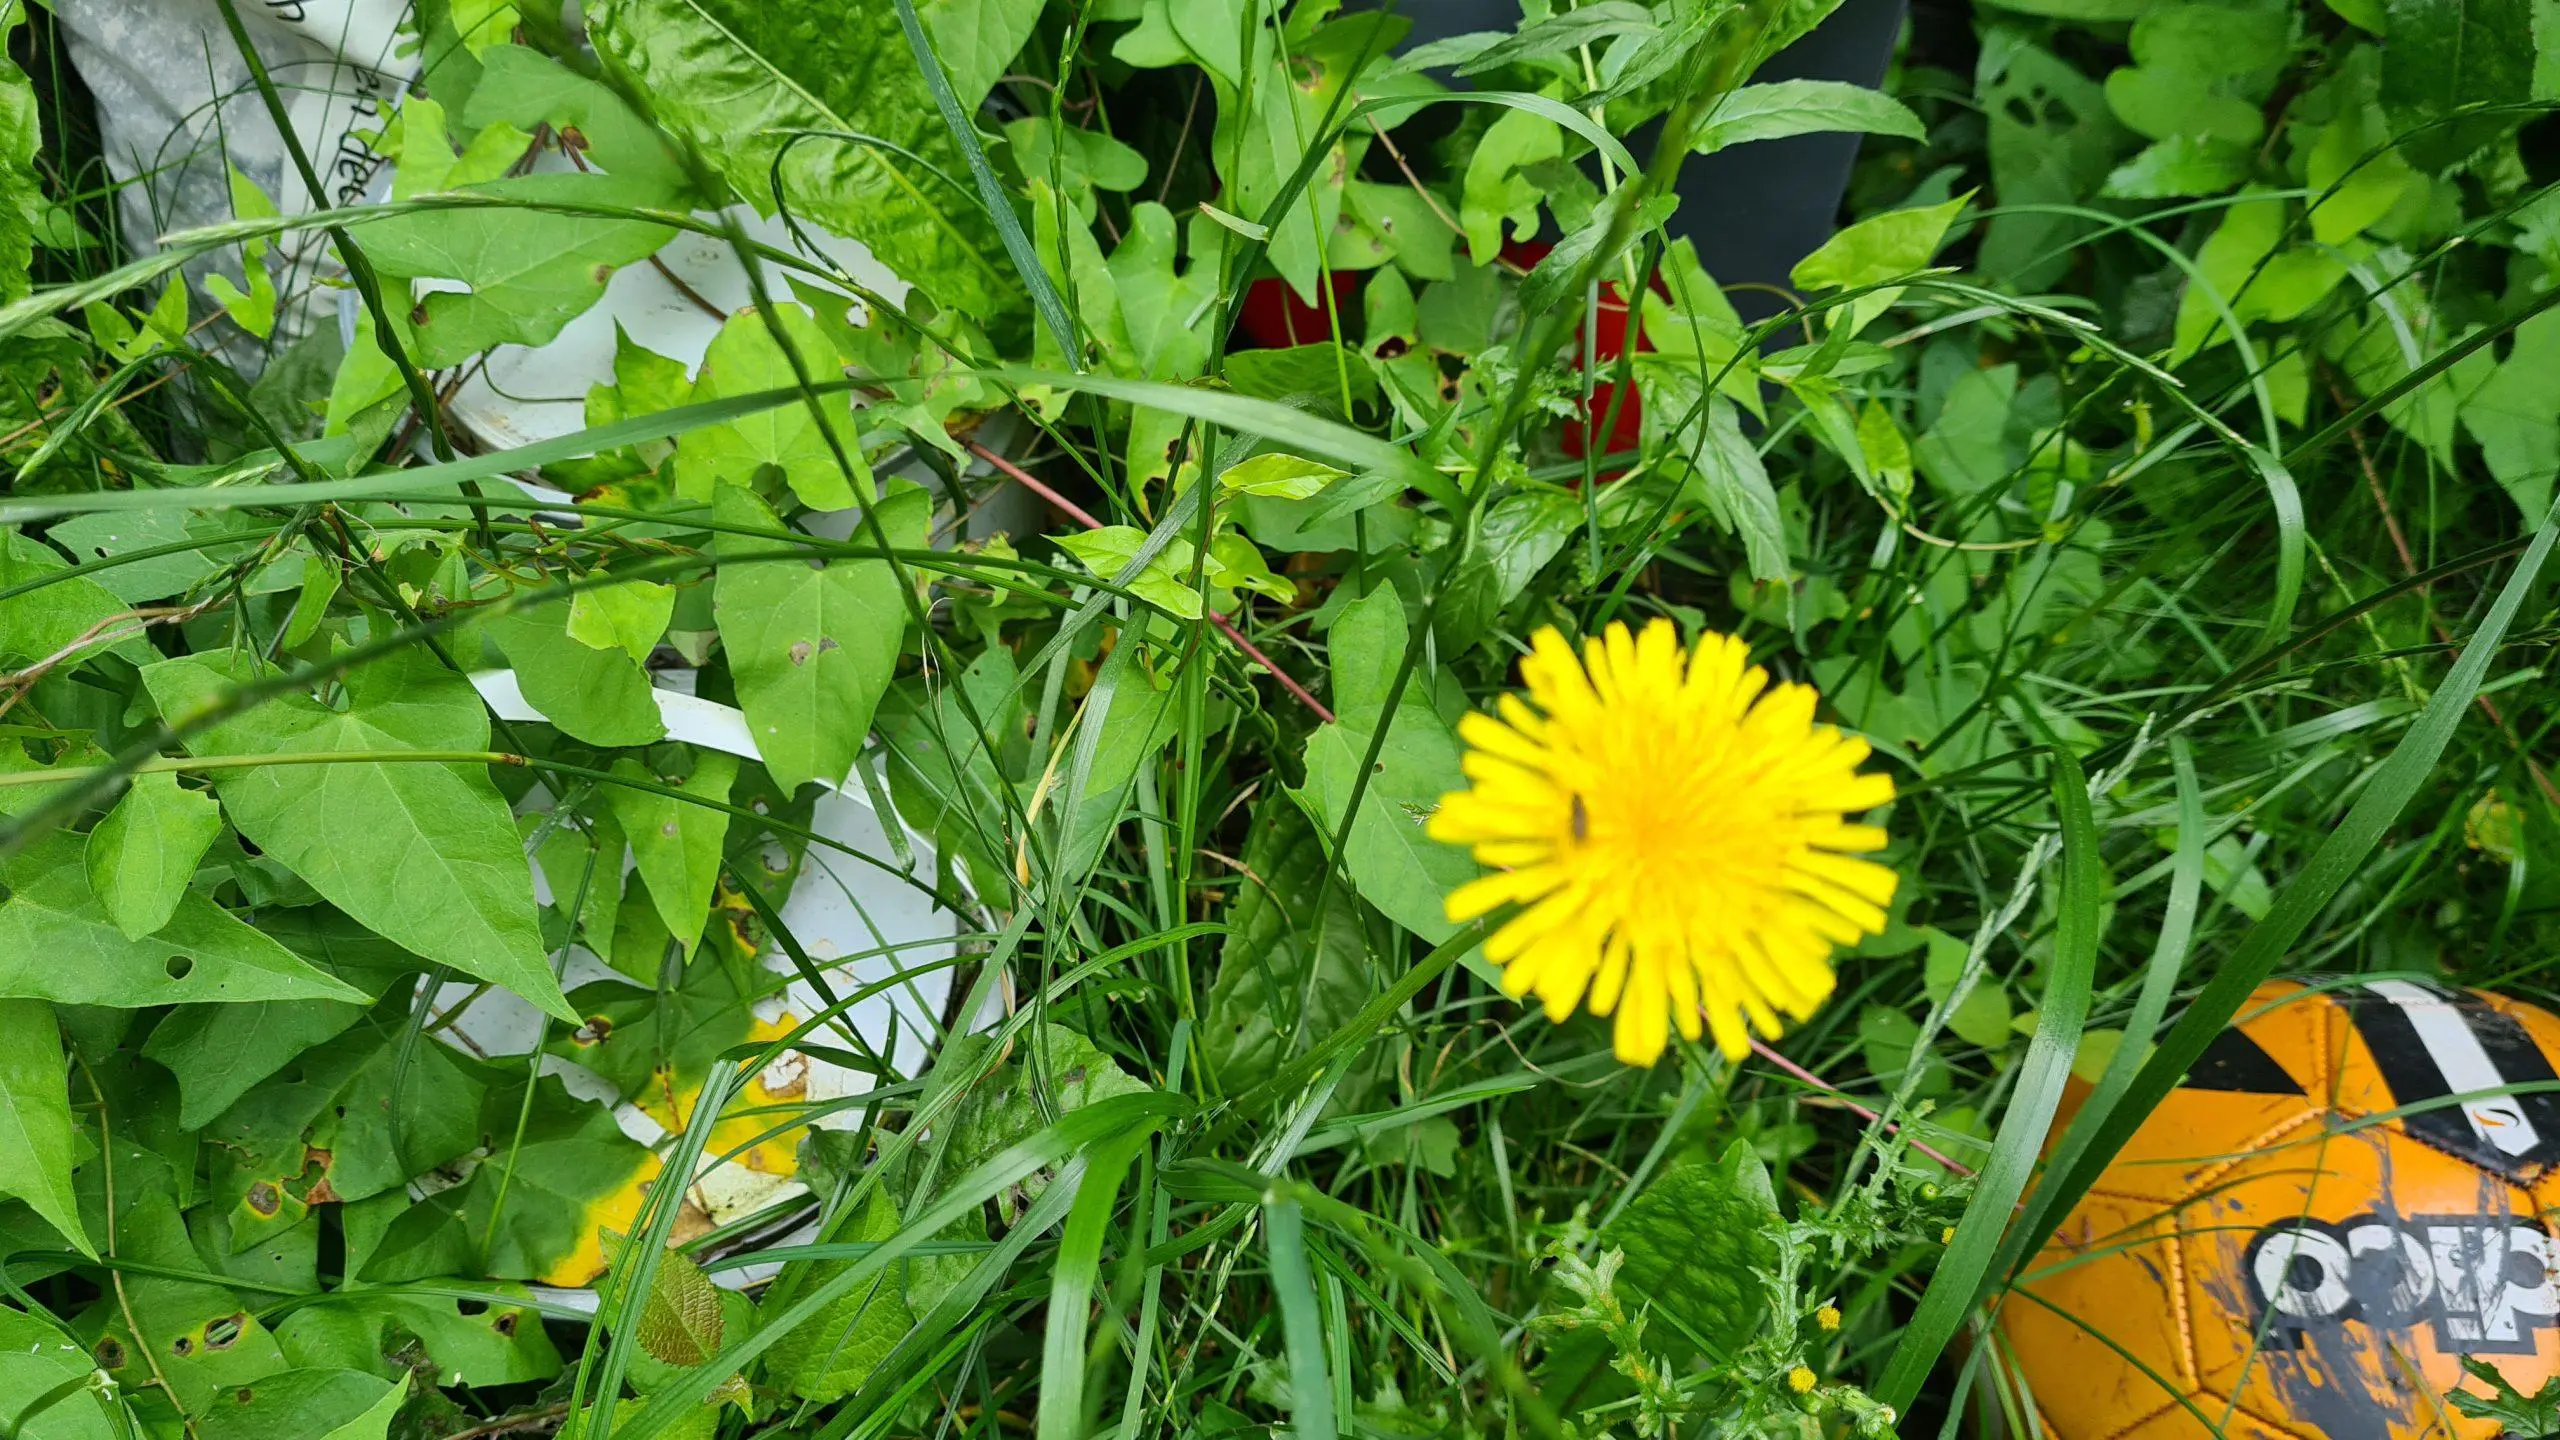 Invasive weeds come in all shapes and sizes just like dandelions